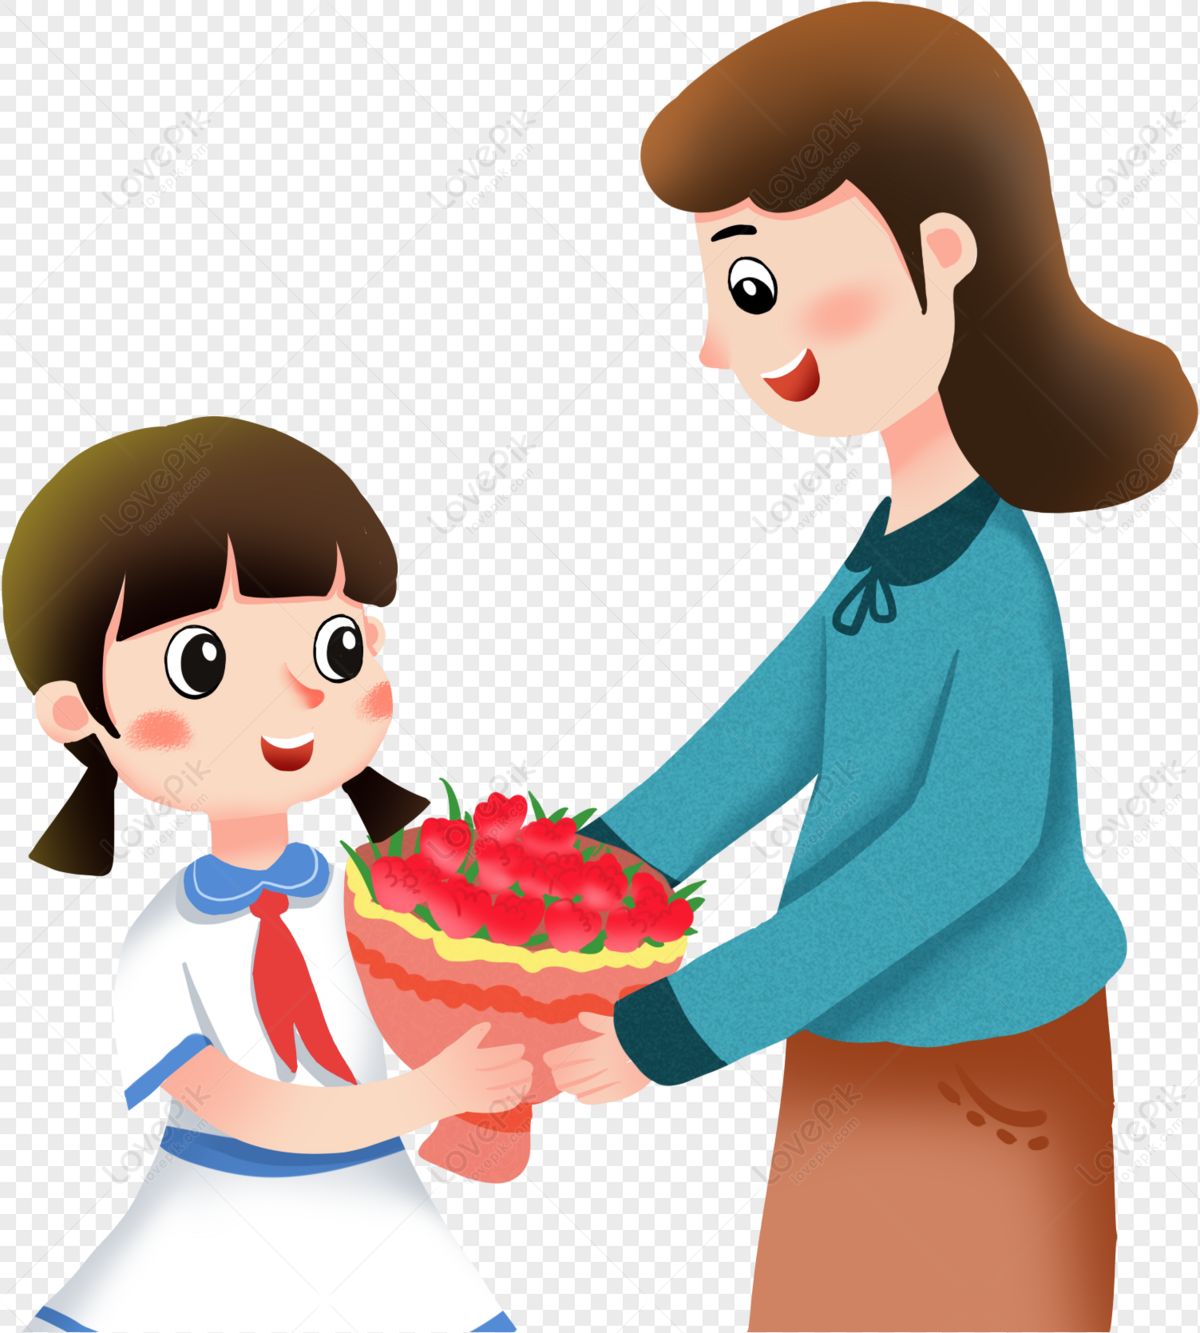 Teachers Day Material PNG Image And Clipart Image For Free ...